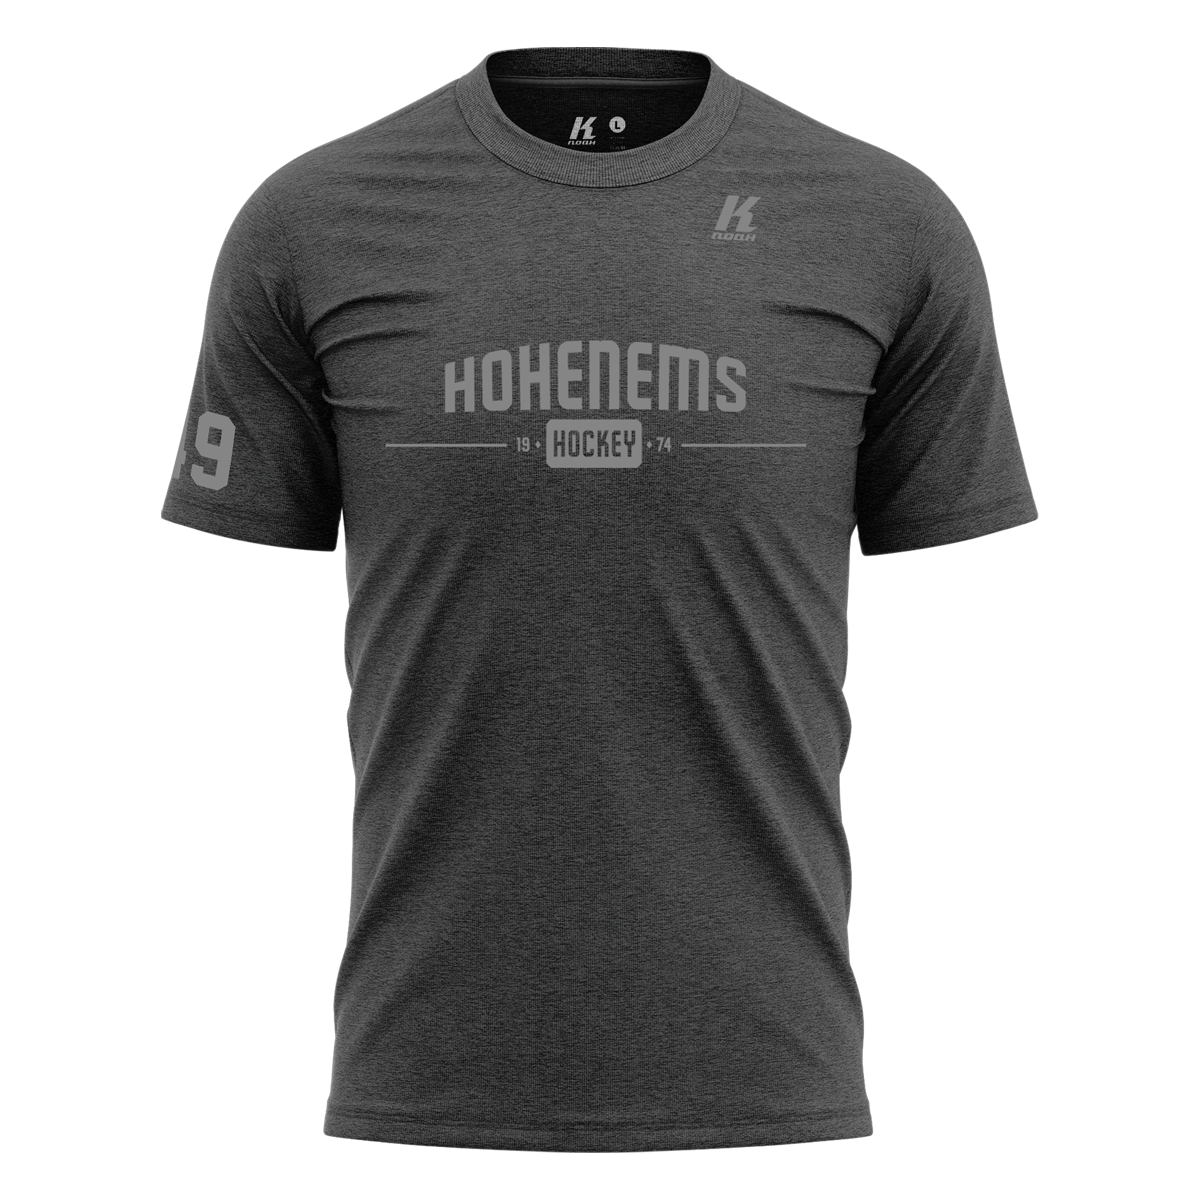 HSC Basic Tee 1 anthracite with Playernumber/Initials